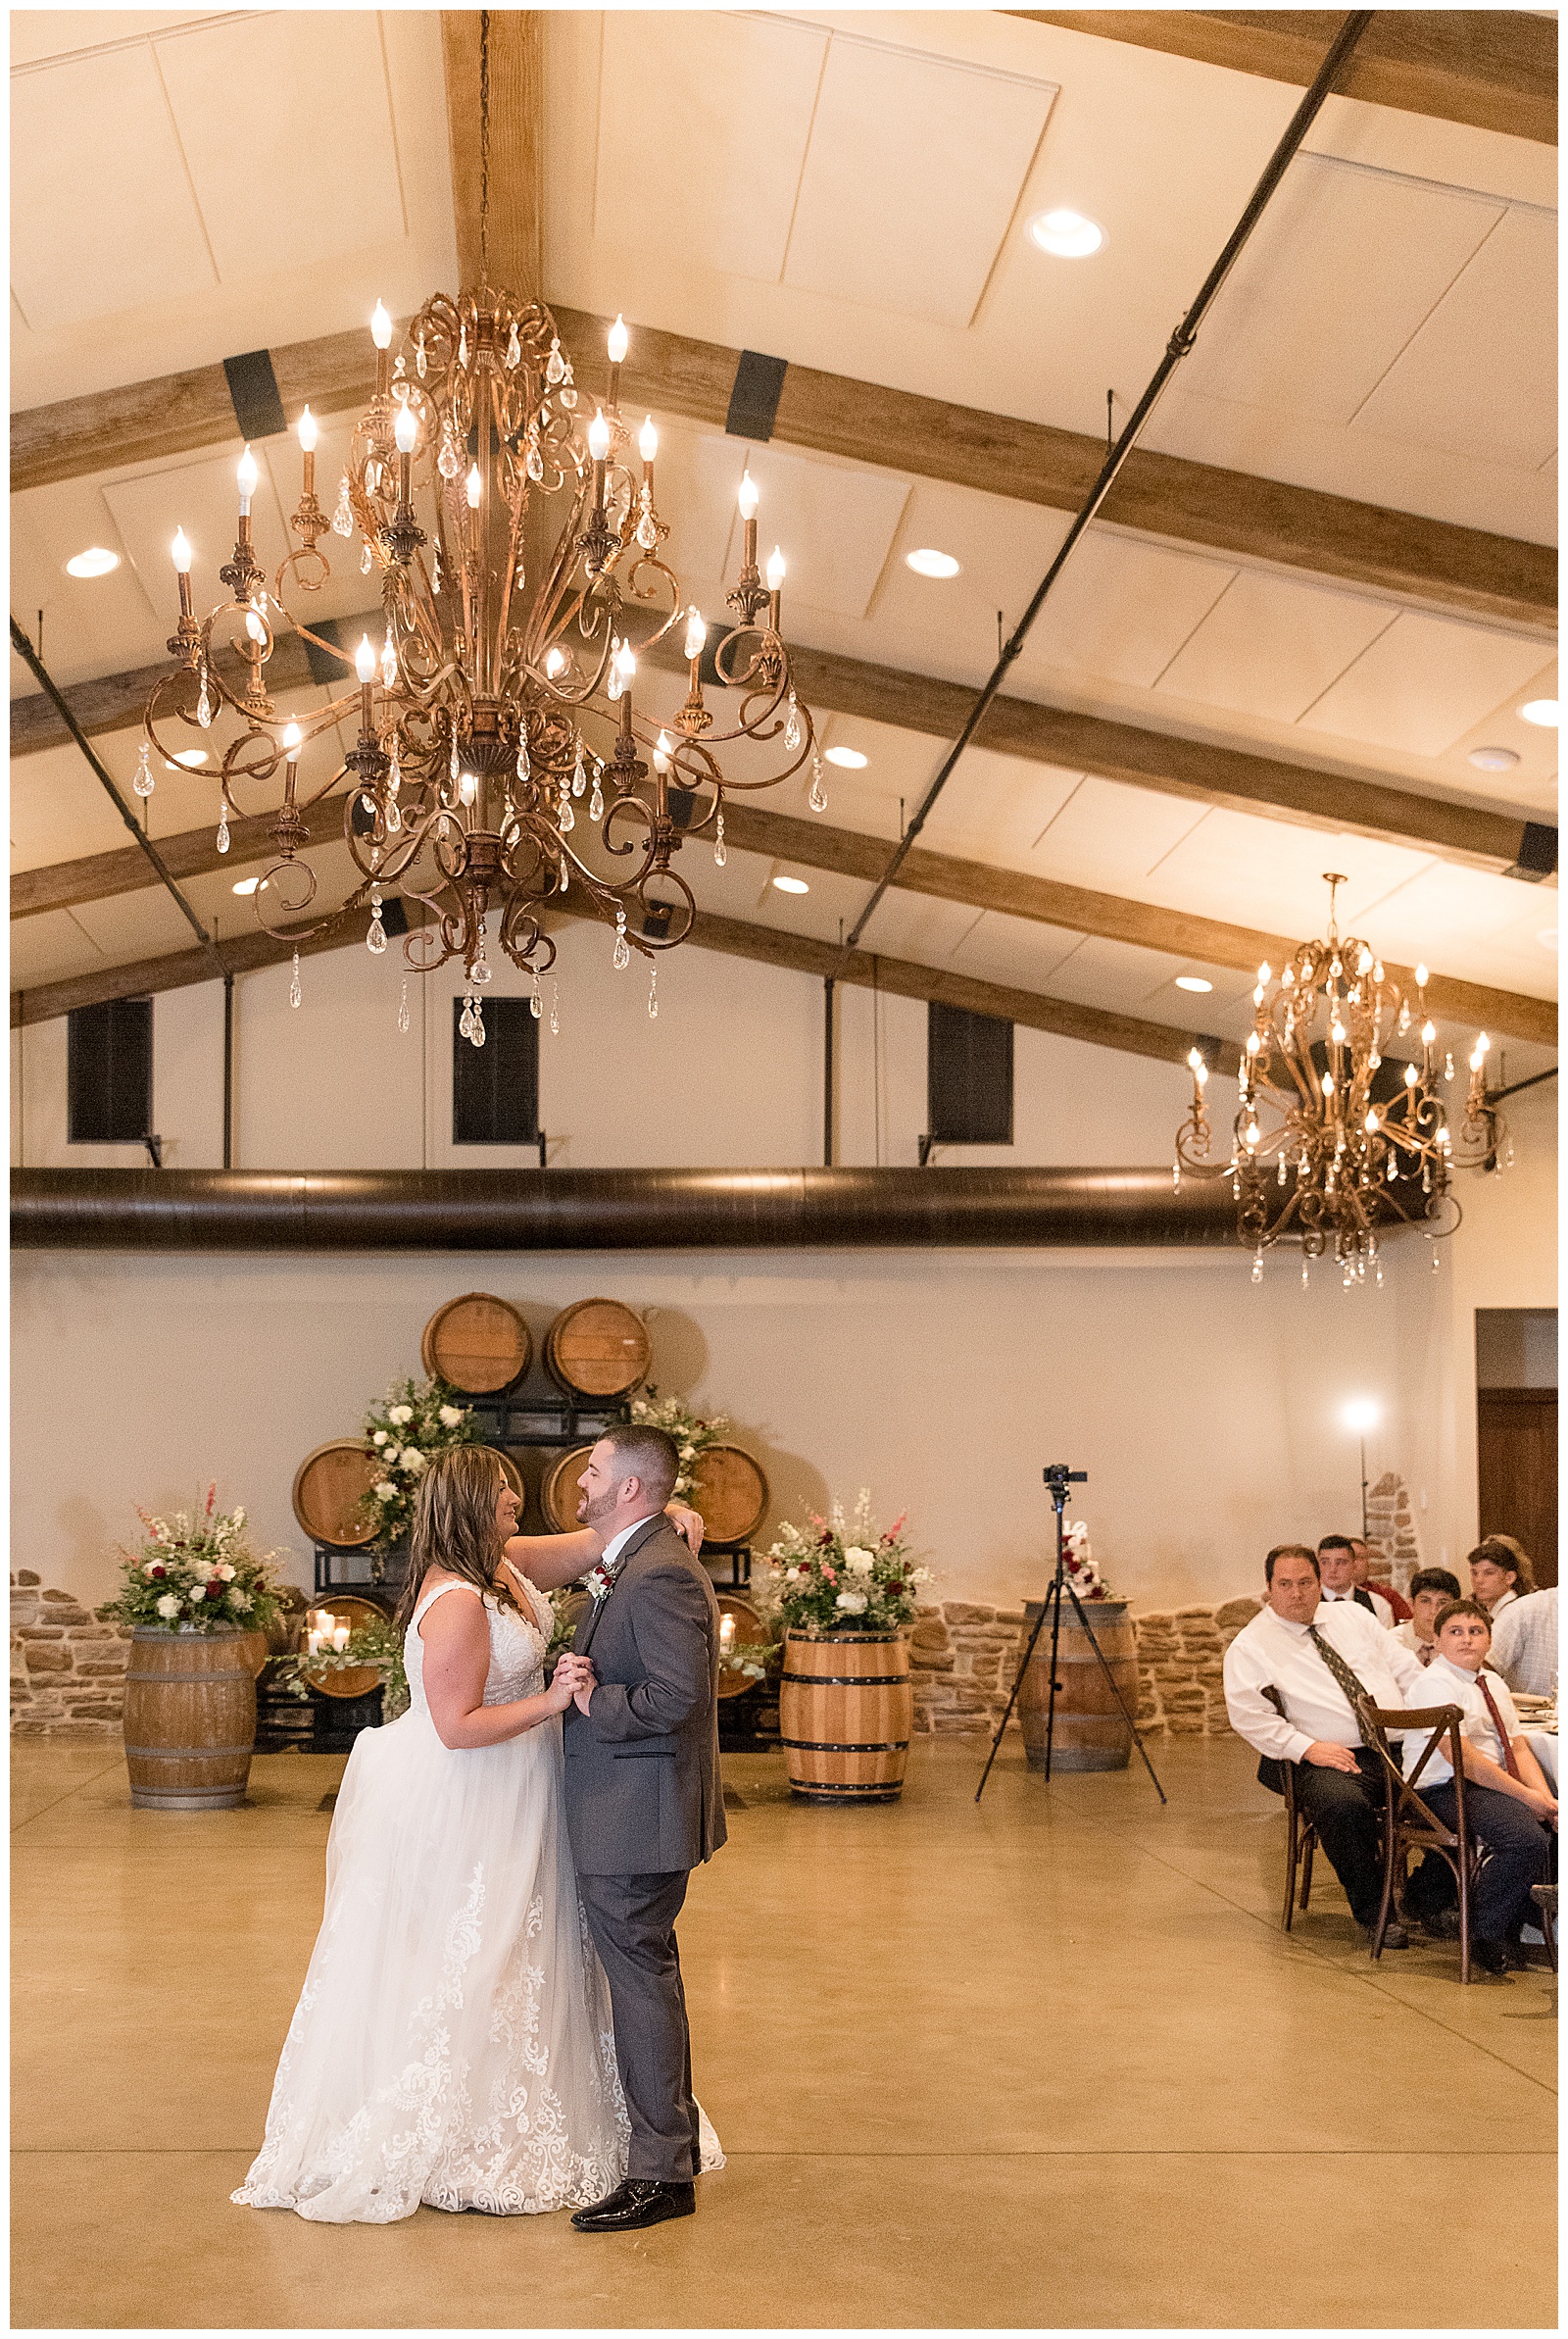 couple shares their first dance as husband and wife inside beautiful reception at folino estate as guests are seated and watching them